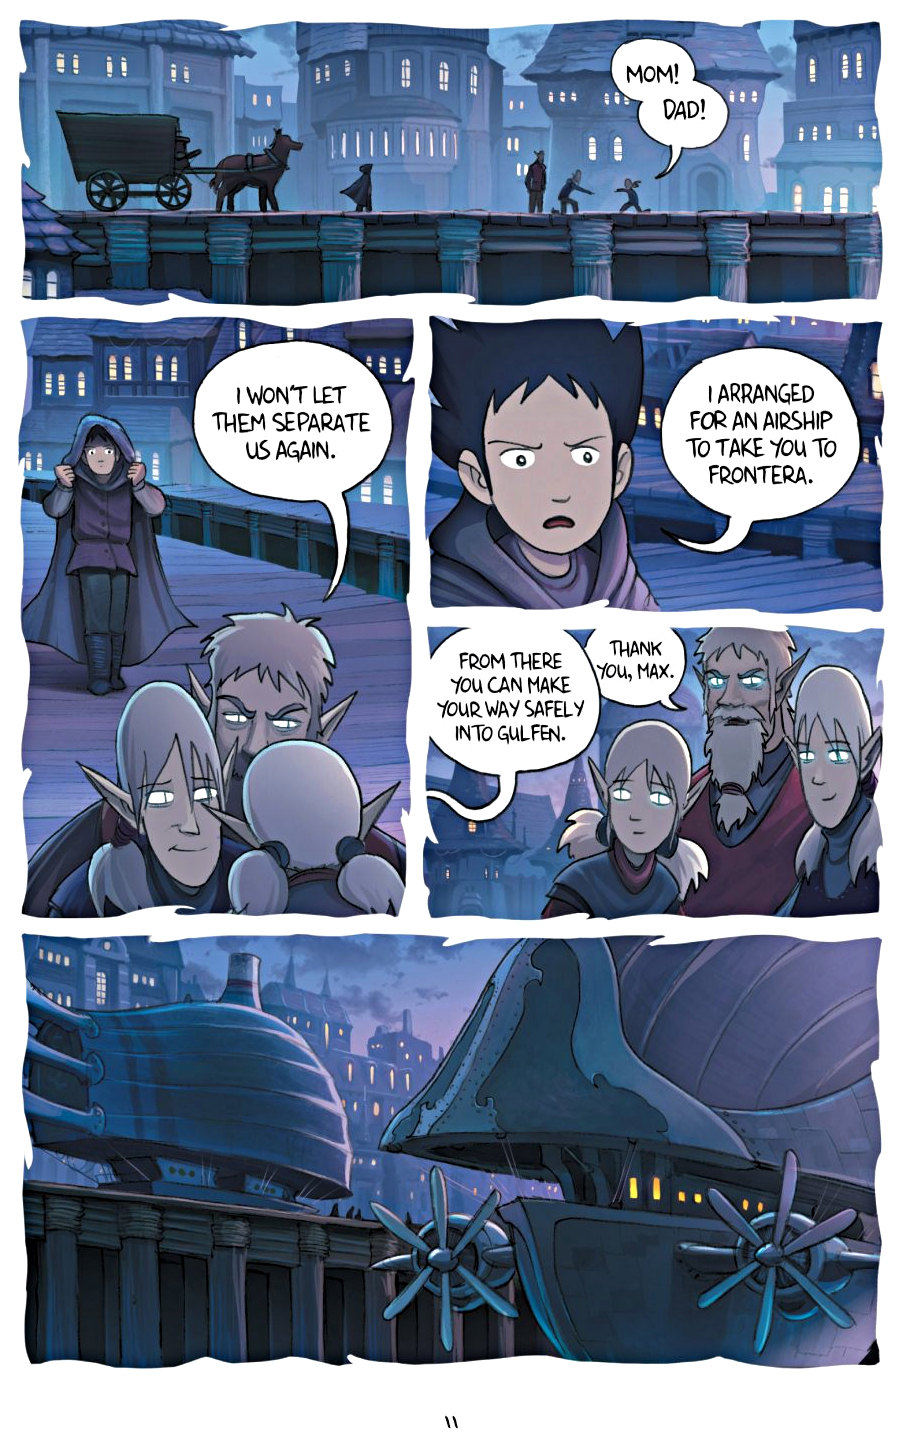 page 11 of amulet 5 prince of the elves graphic novel